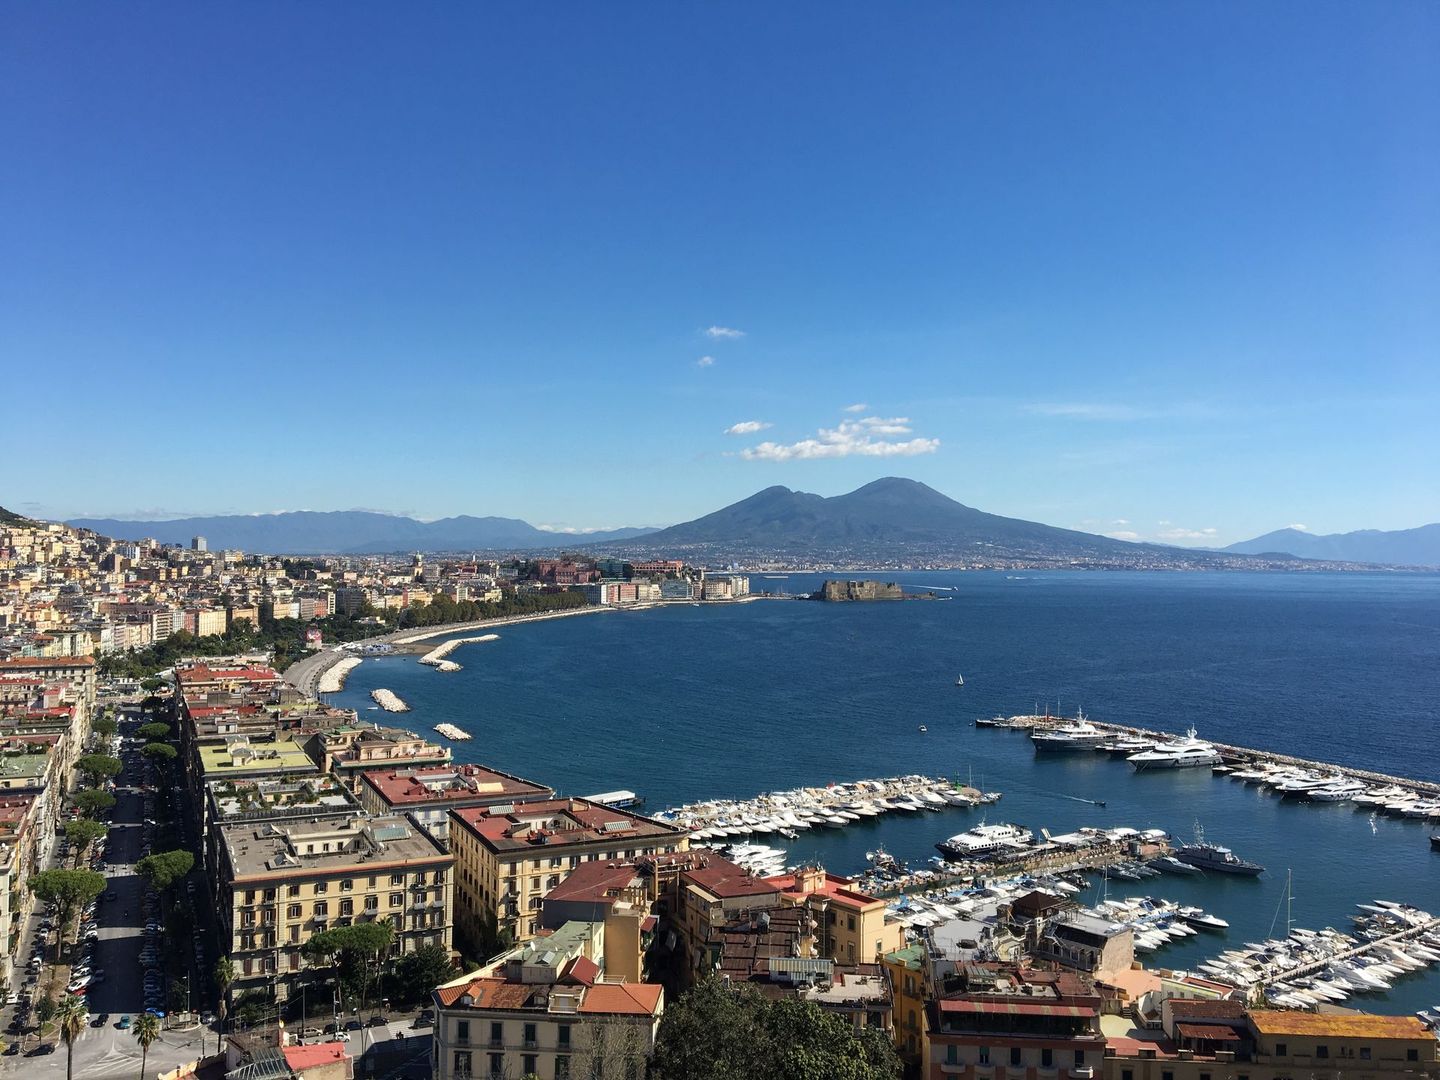 Scenic view of Mount Vesuvius overlooking the Bay of Naples, with a marina full of boats and the bustling cityscape.